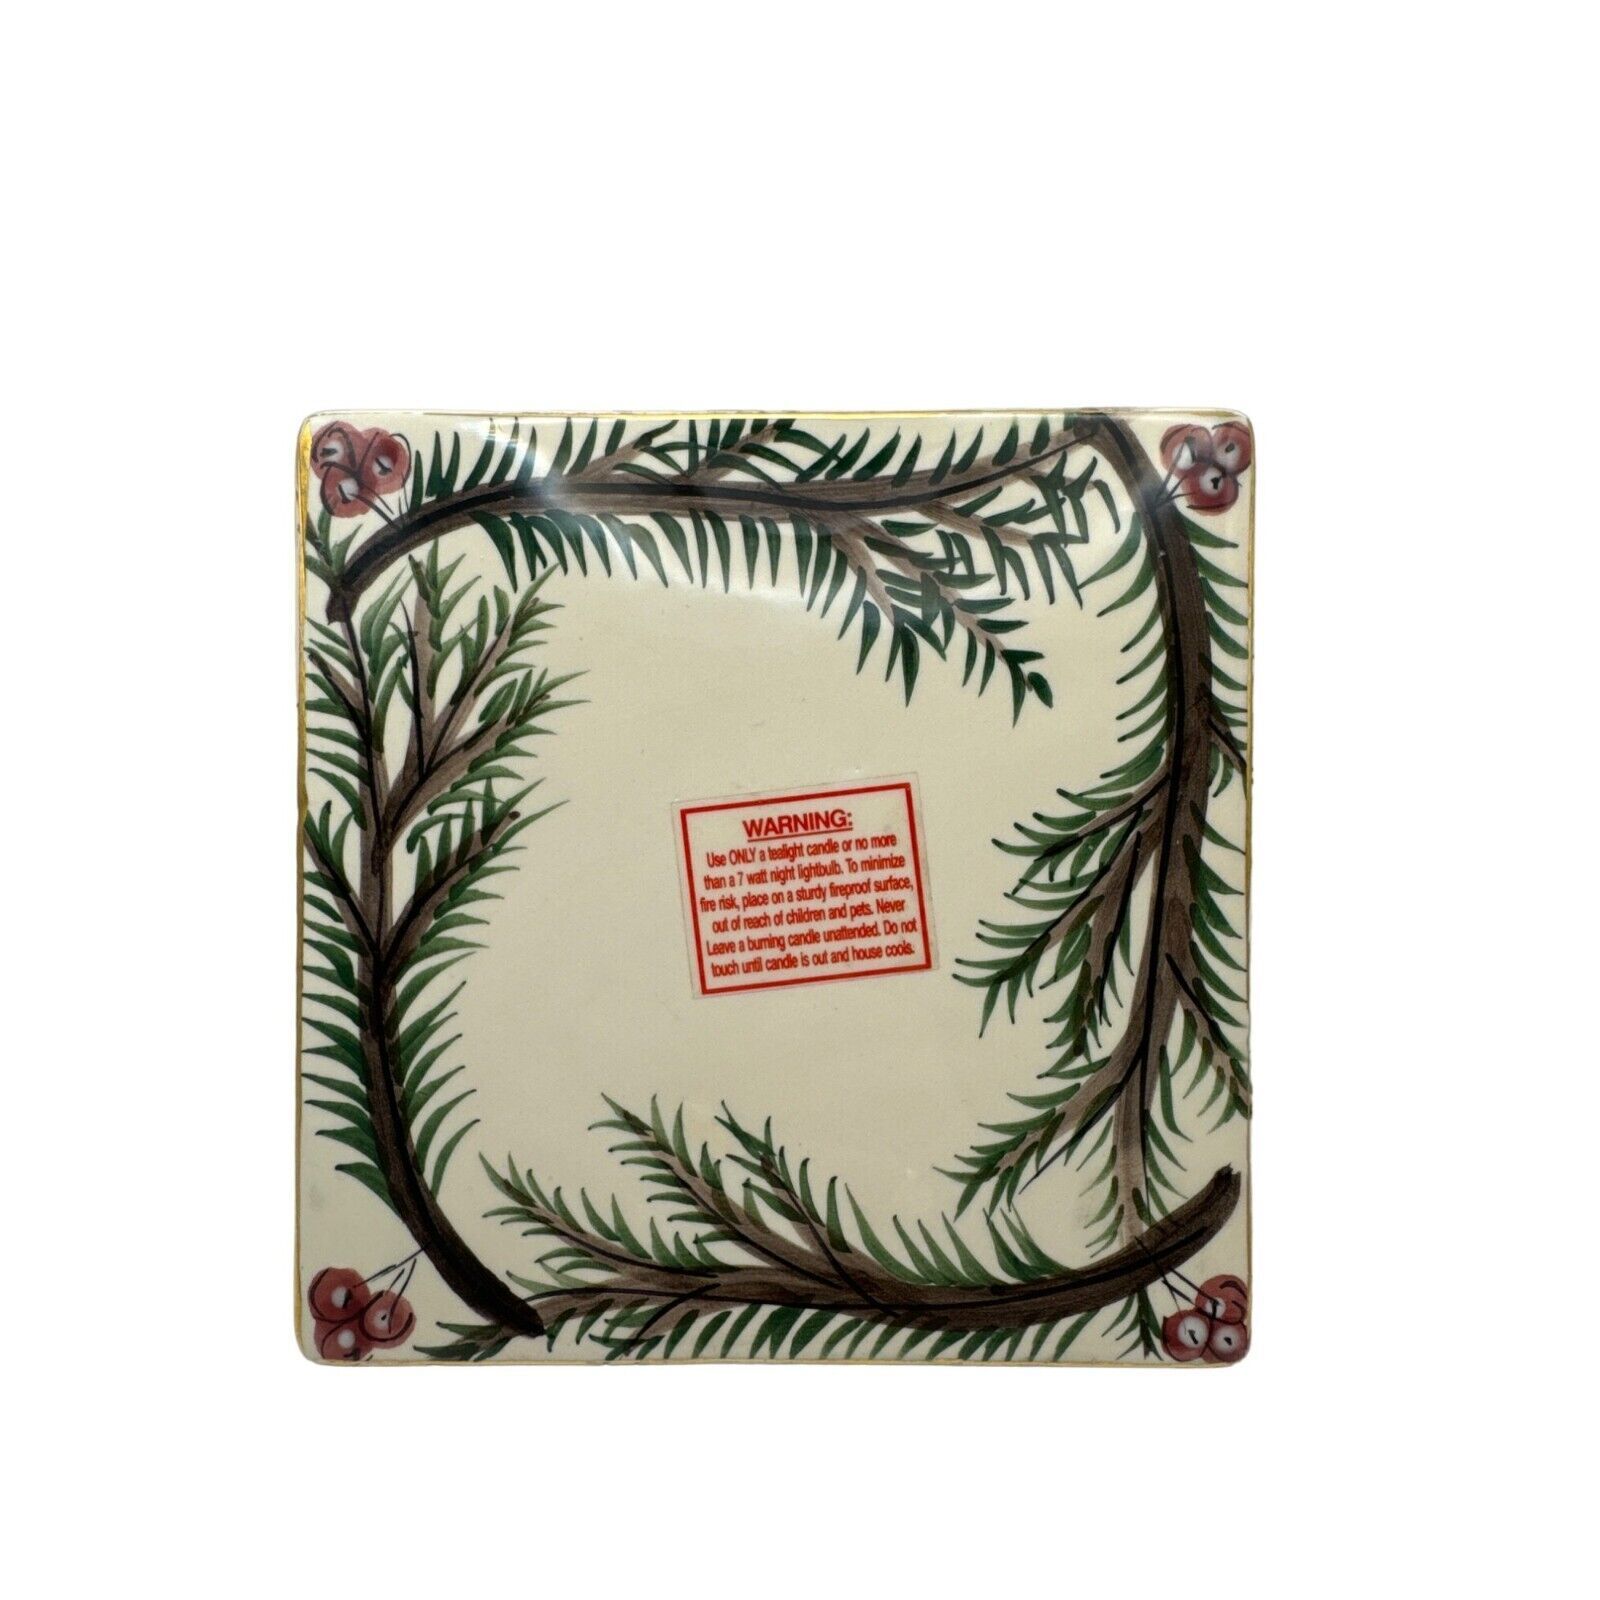 Blue Sky Base Plate For Come All Ye Faithful Church Pine Pinecones 5.5 in Square - $10.39